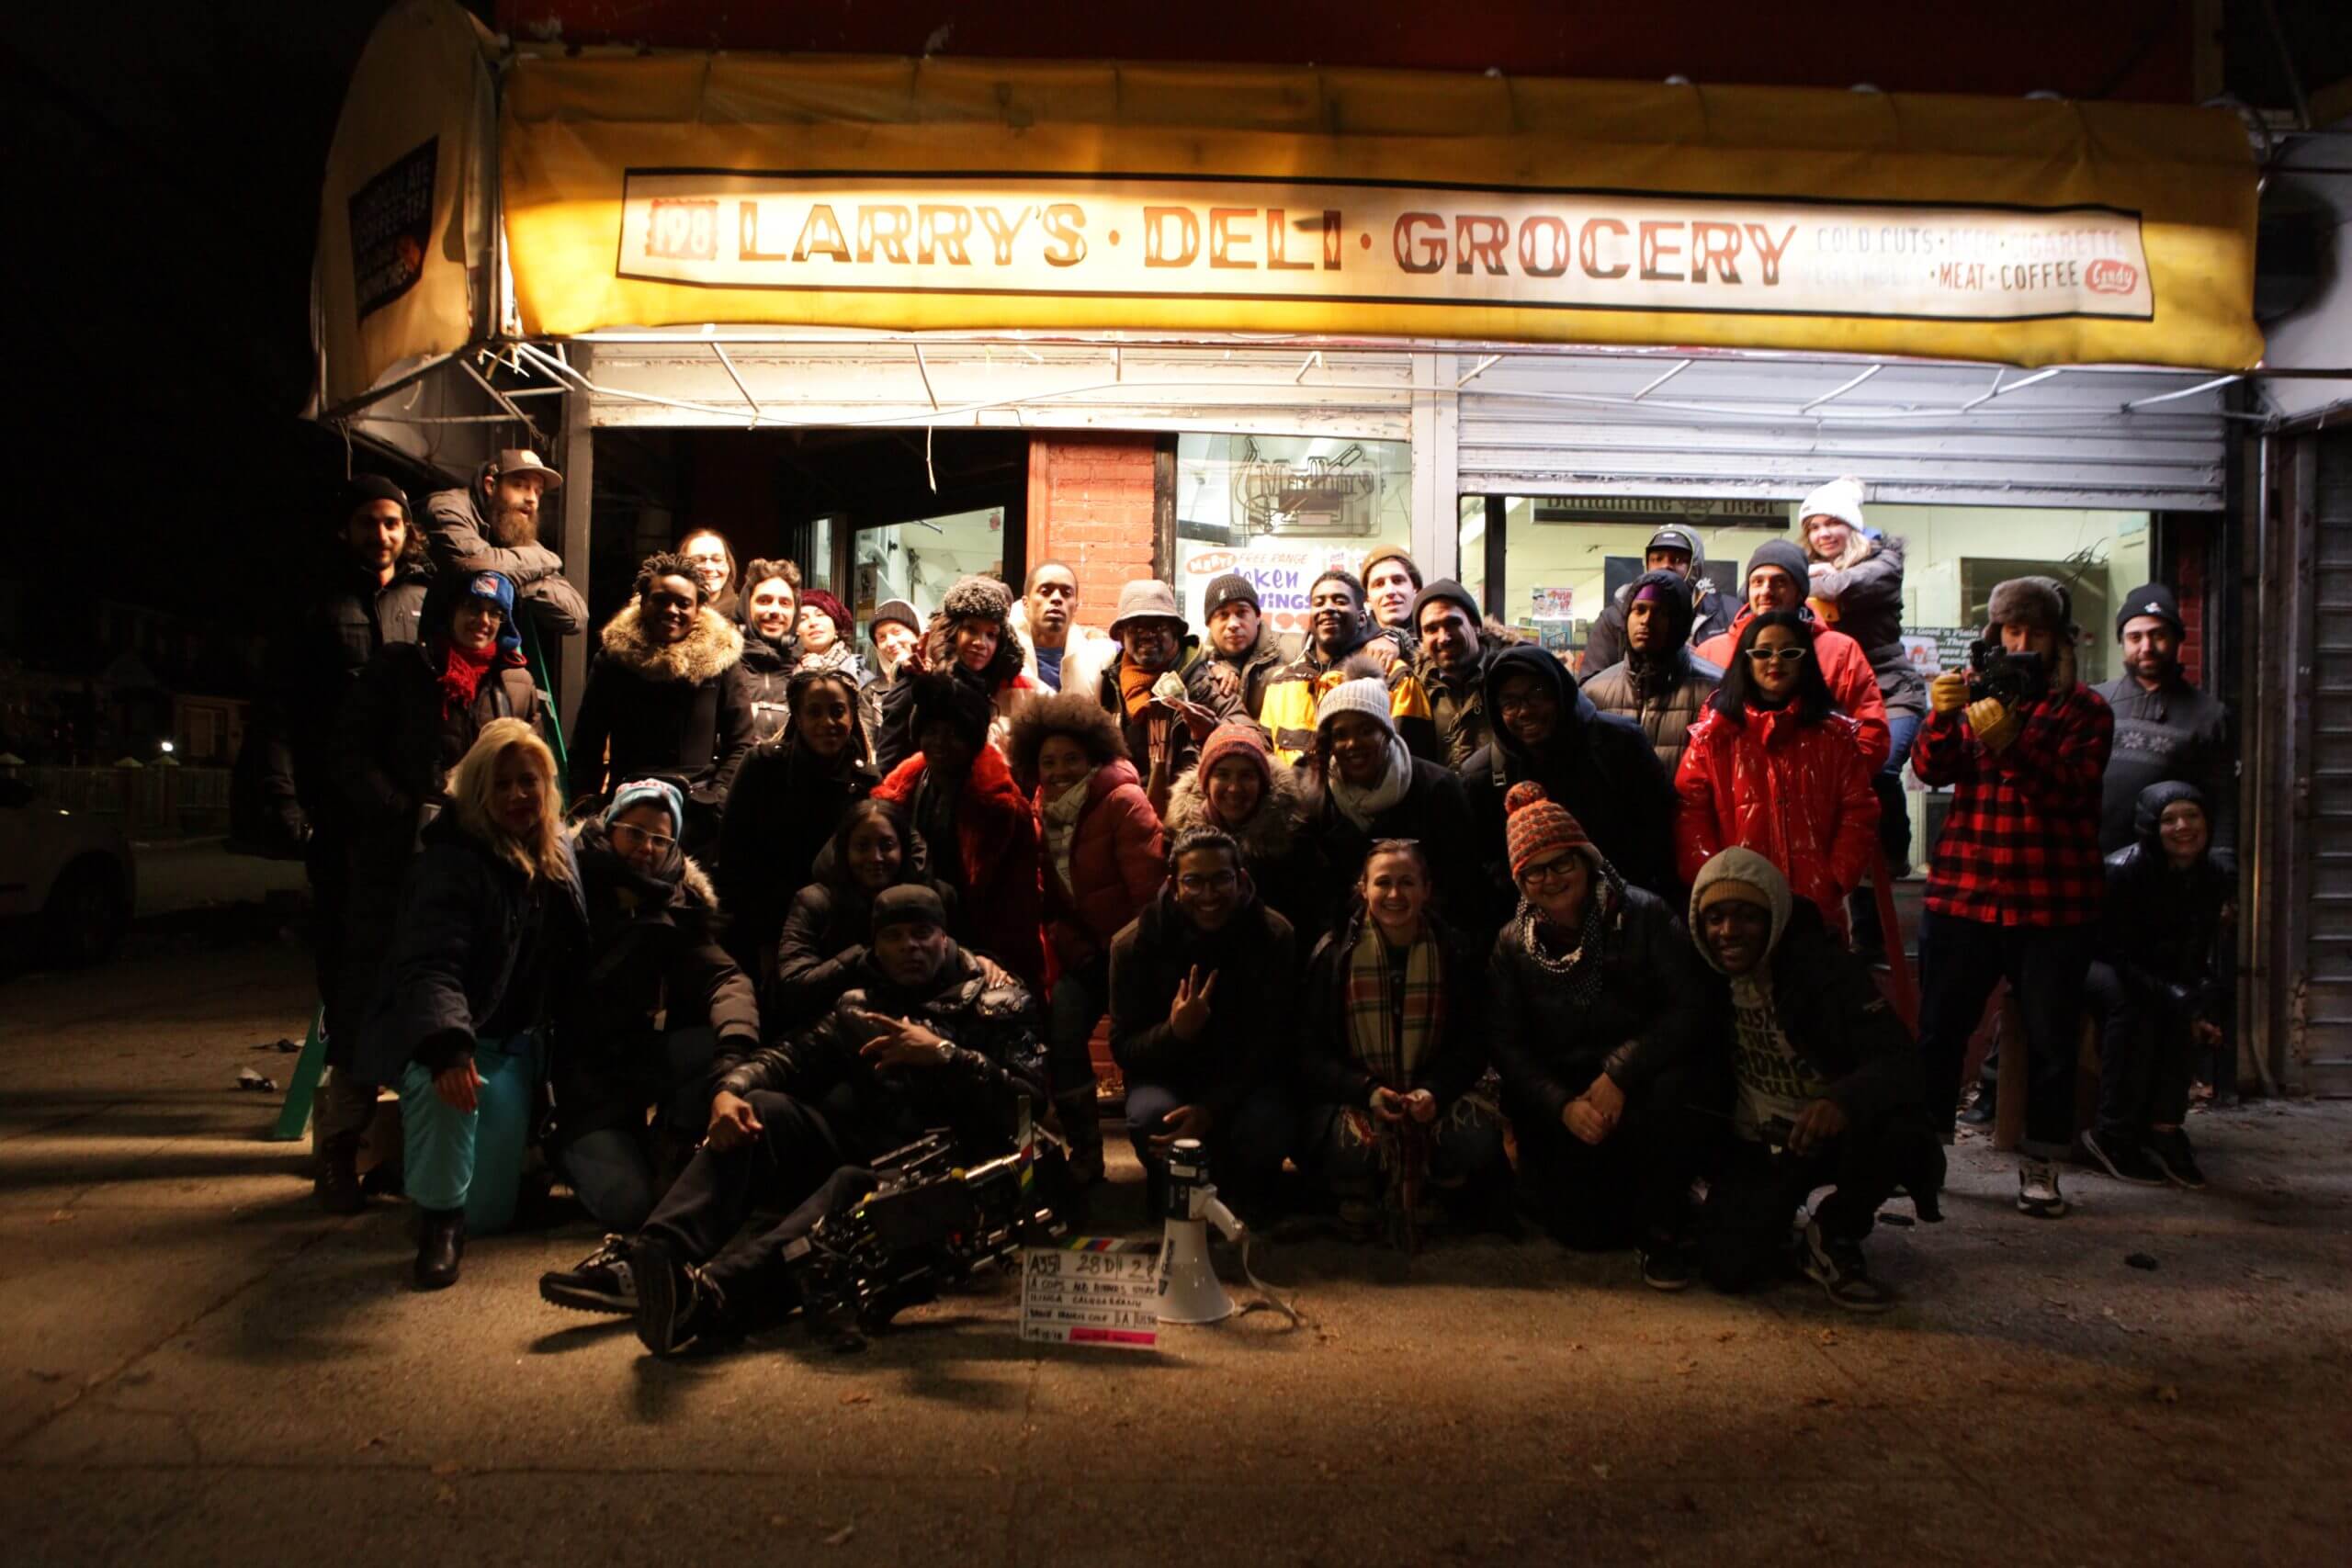 Production still of A Cops and Robbers Story. Crew, cast and documentary subjects are posing for a final photo at the end of the dramatizations shoot. They are outside at night and stand underneath a bodega's lit awning that reads "Larry's Deli Grocery."